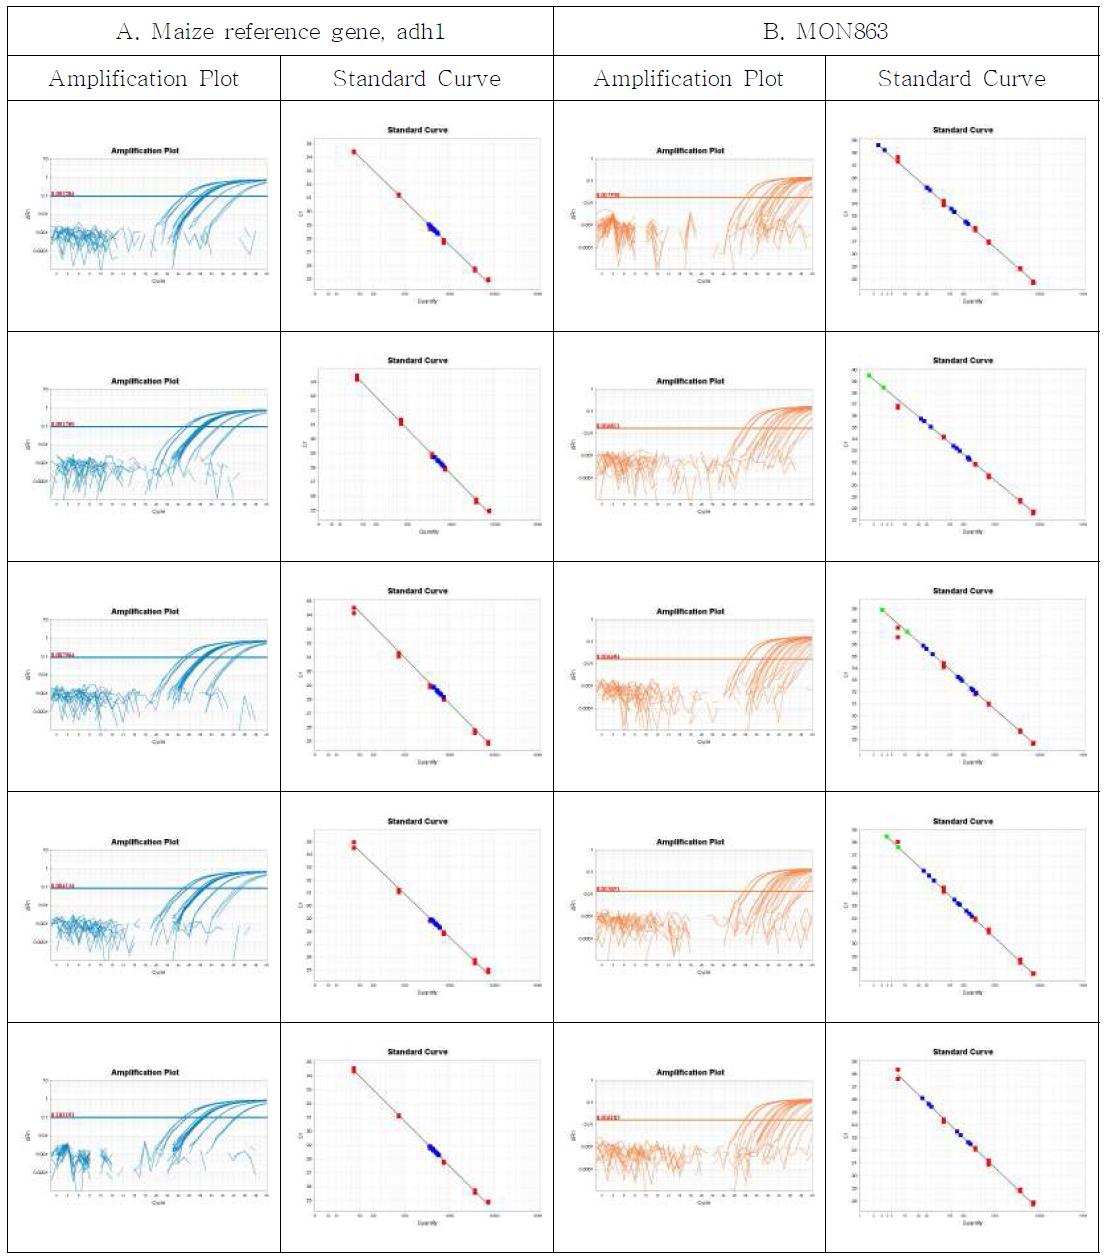 Amplification plots and standard curves for MON863 event-specific quantitative Real-time PCR method using gradient-diluted MON863 CRM genomic DNA as the template, performed by Lab. 2. A. Amplification graph and standard curves for the maize reference gene, adh1 assay. B. Amplification graph and standard curves for the MON863-event specific assay.